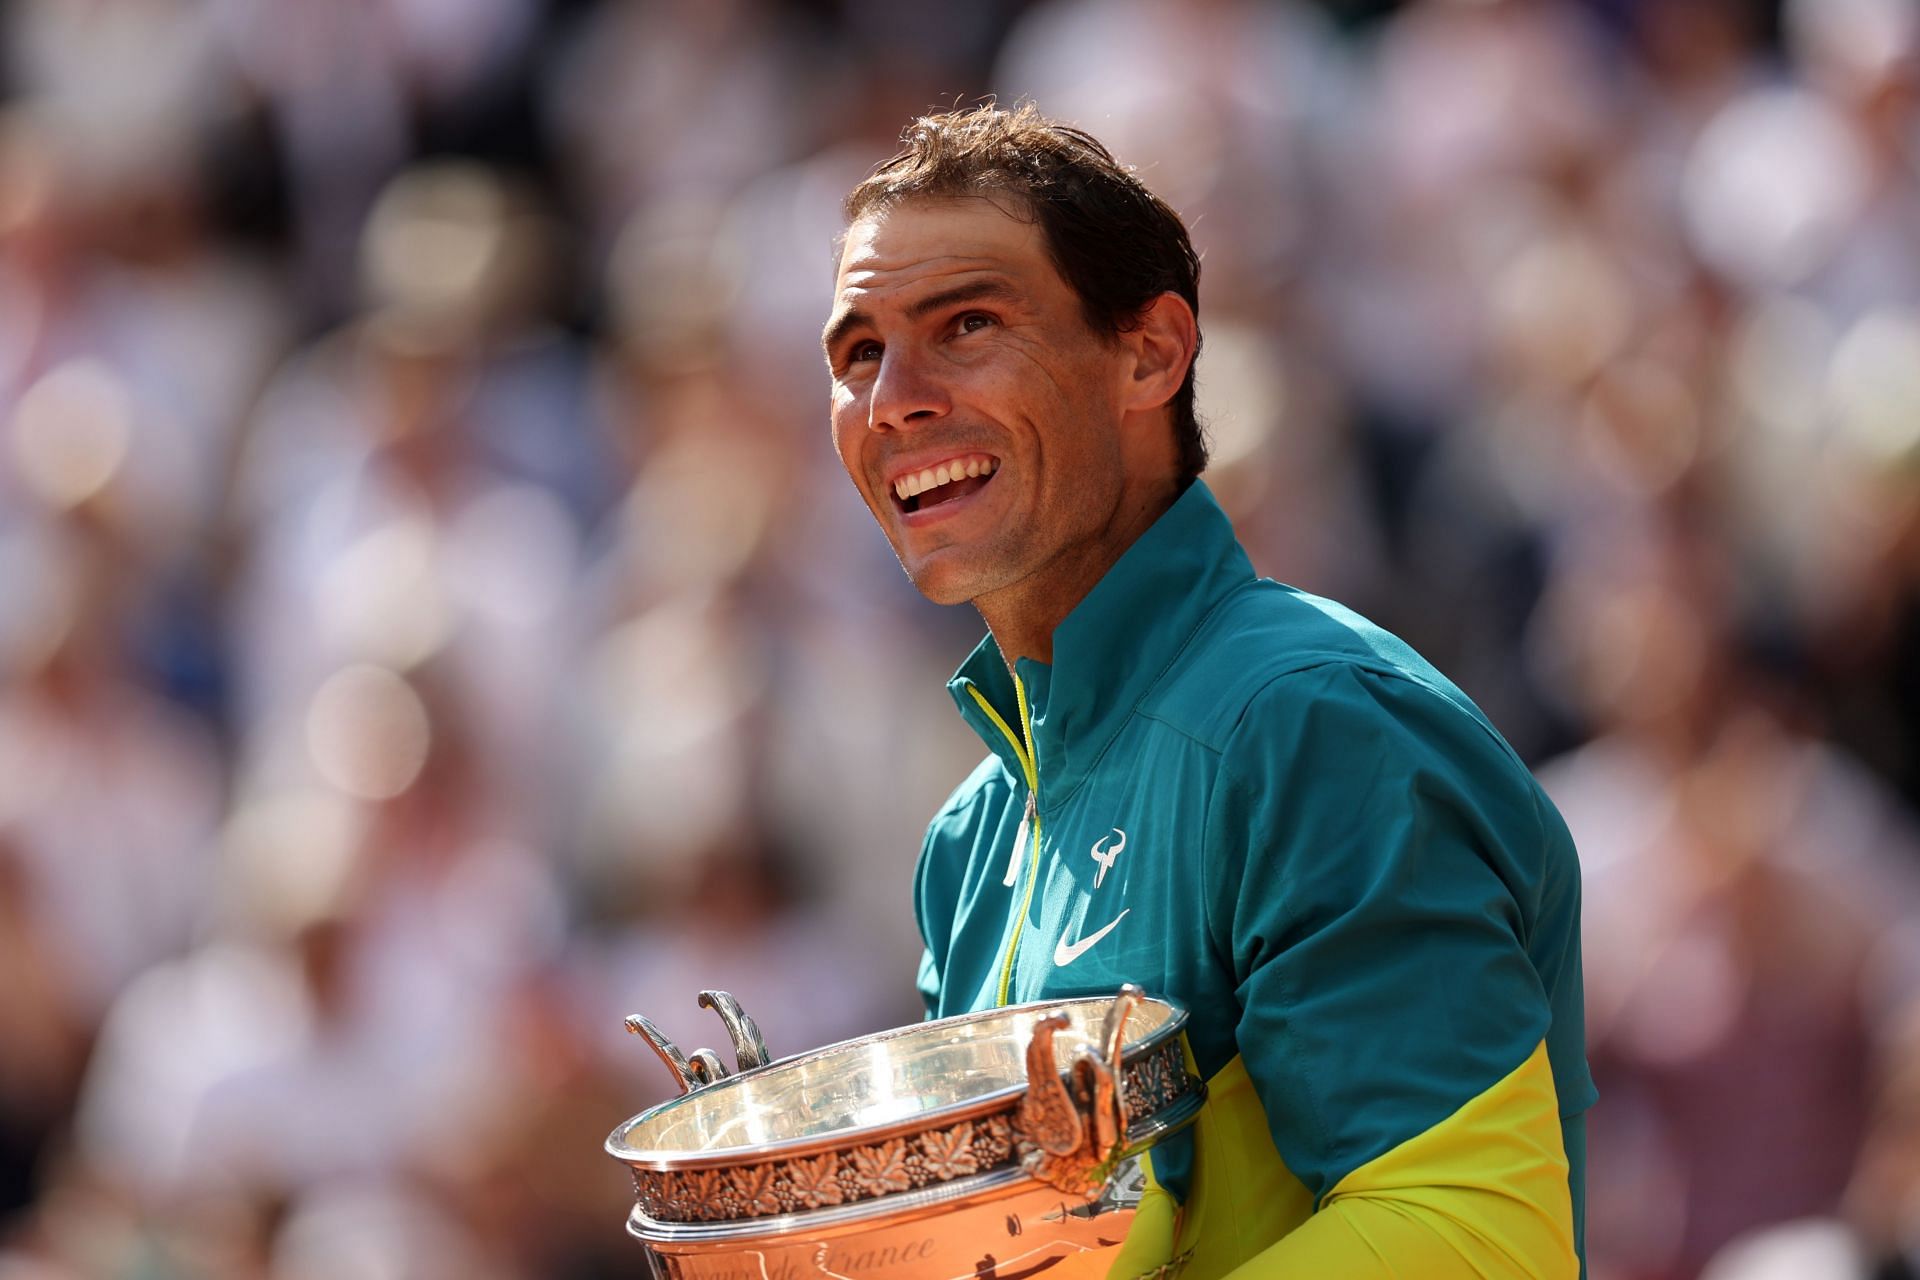 Rafael Nadal's top 5 trophy photoshoots at the French Open